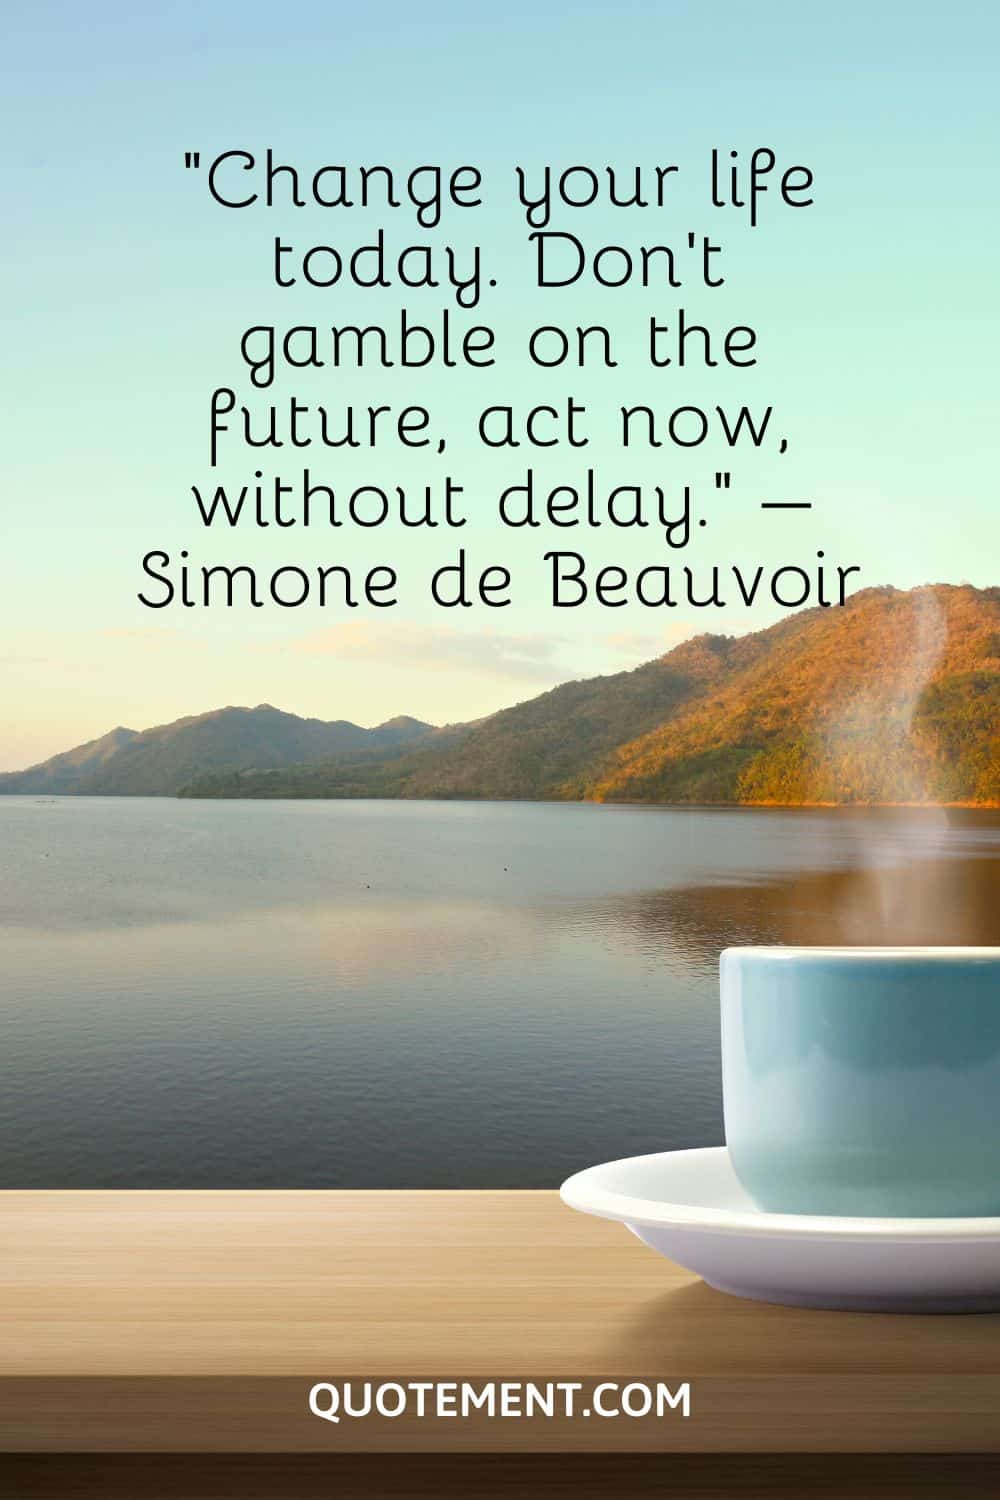 Change your life today. Don’t gamble on the future, act now, without delay.